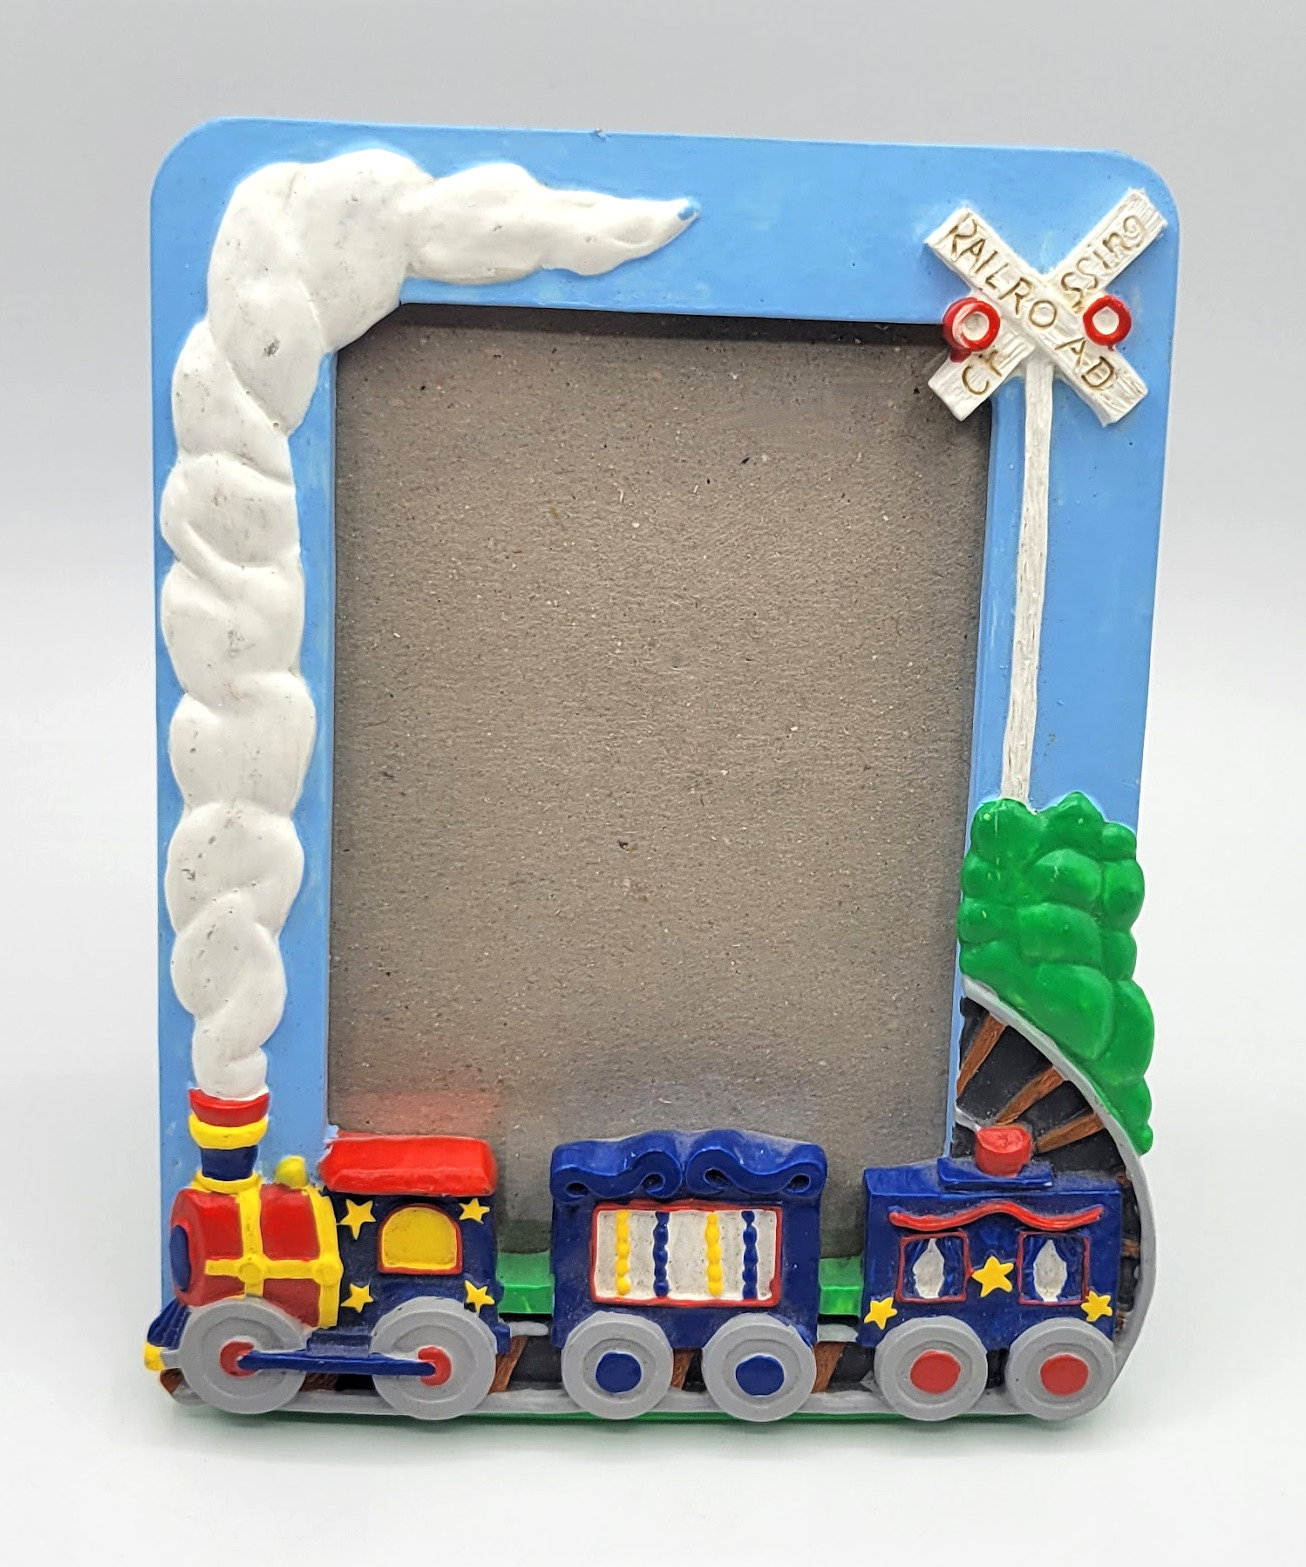 Vintage Train Railroad 3D Resin Photo Picture Frame by Papel Freelance